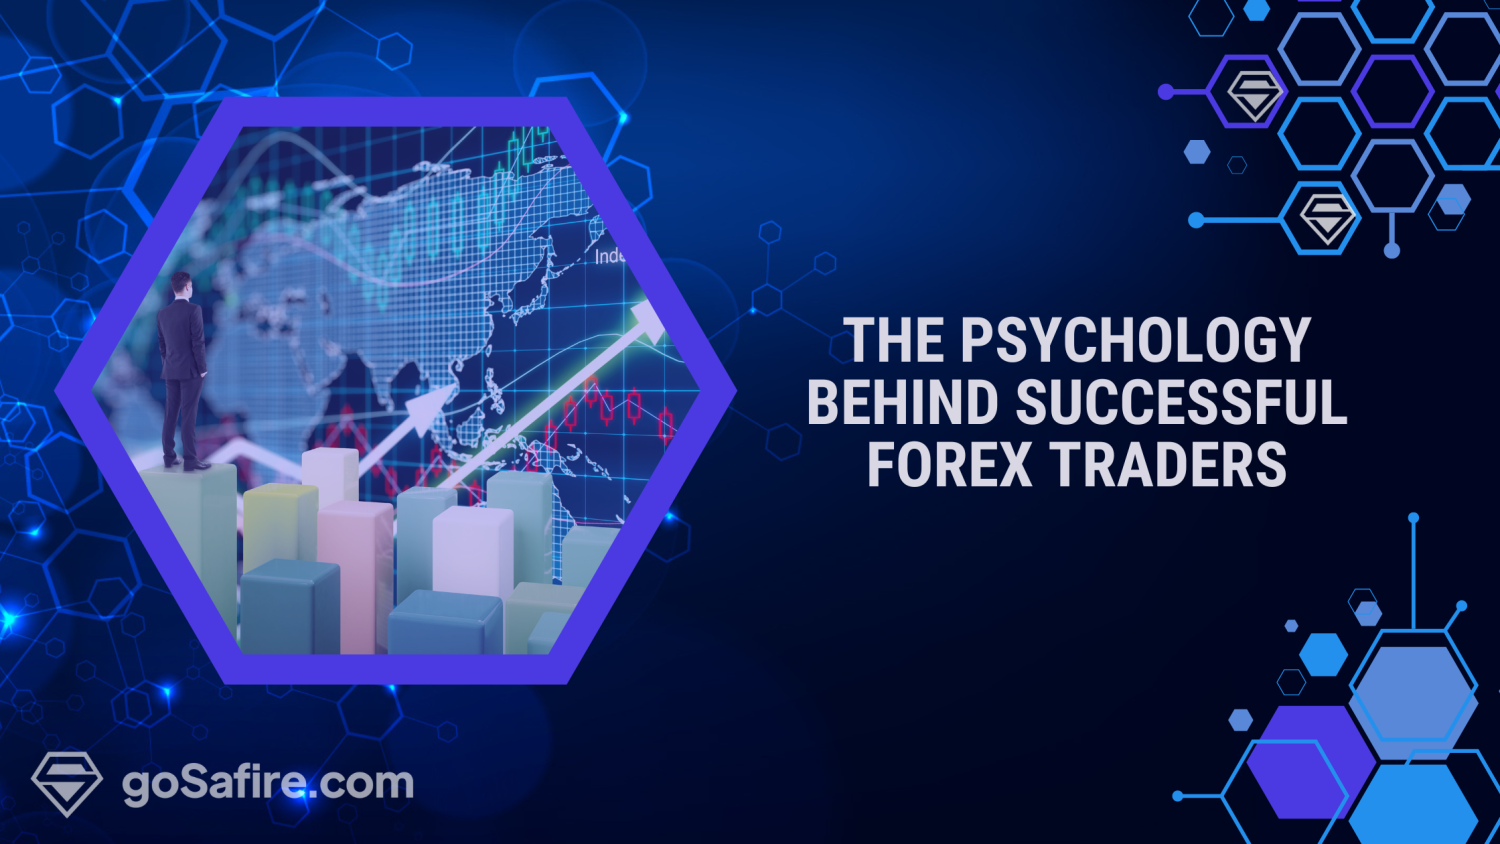 The Psychology Behind Successful Forex Traders